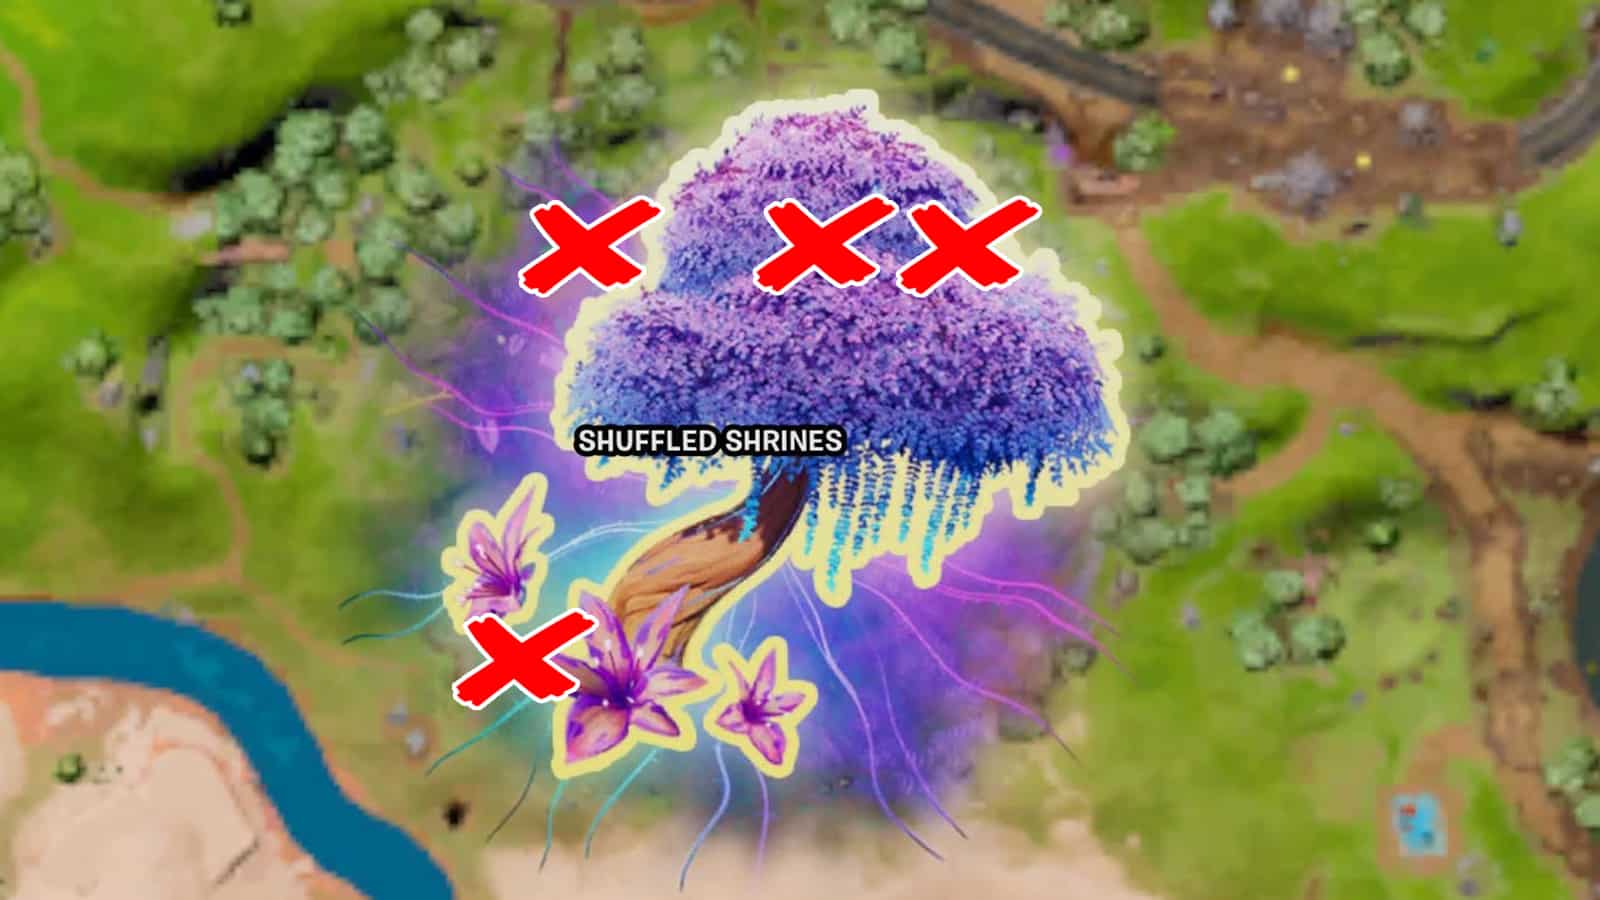 How to solve Find the Flames puzzle in Fortnite - Dexerto